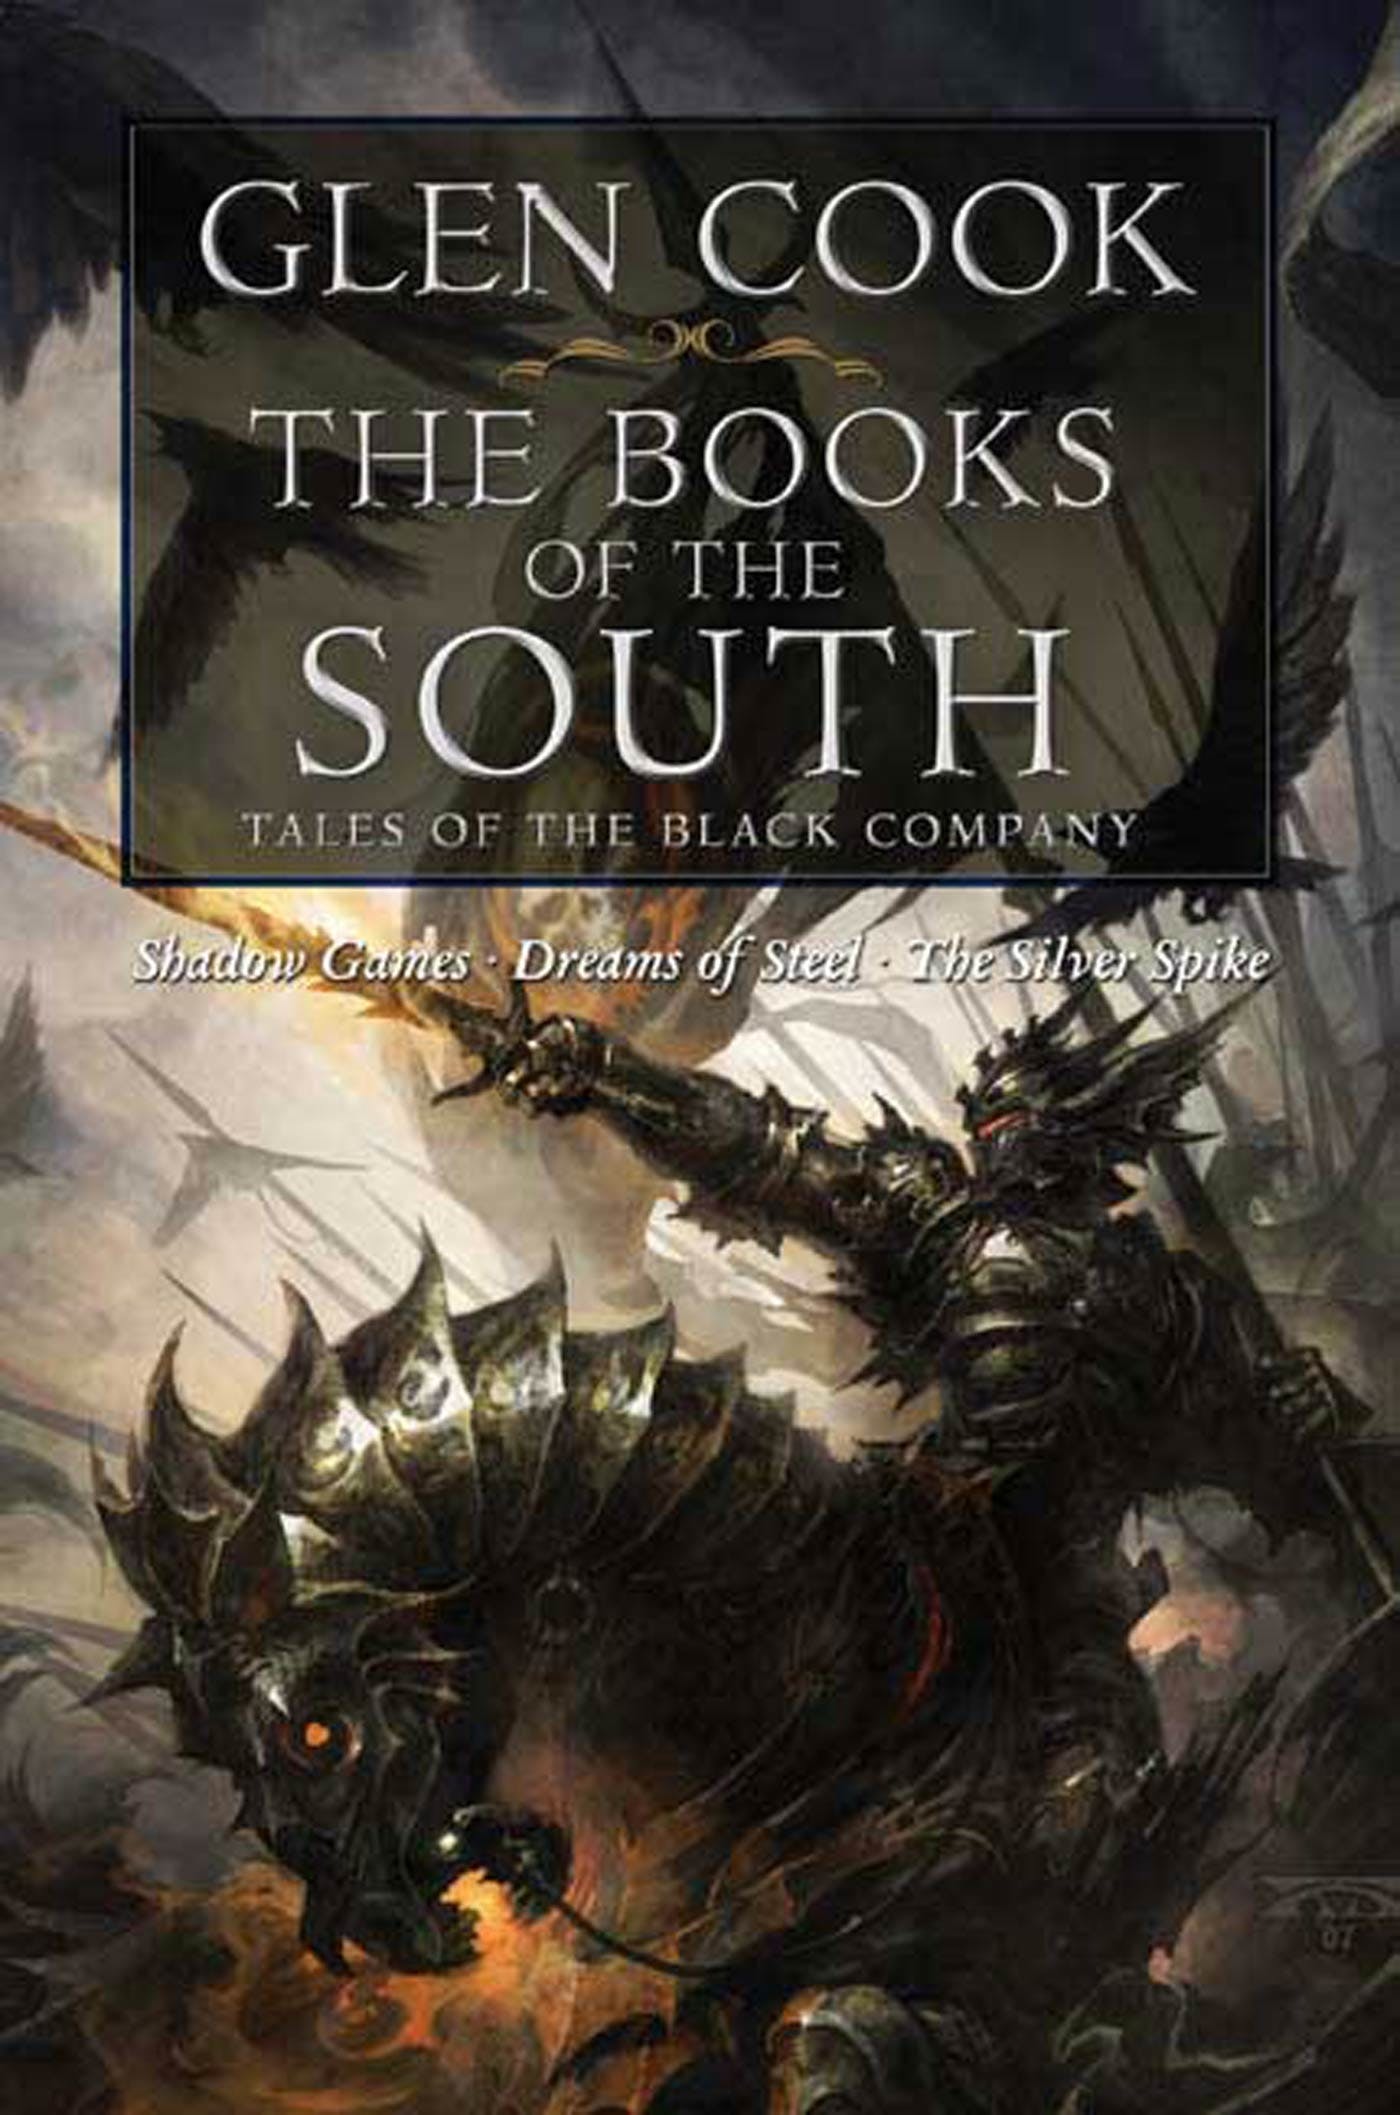 Glen Cook: The Books of the South (2008, Tor Books)